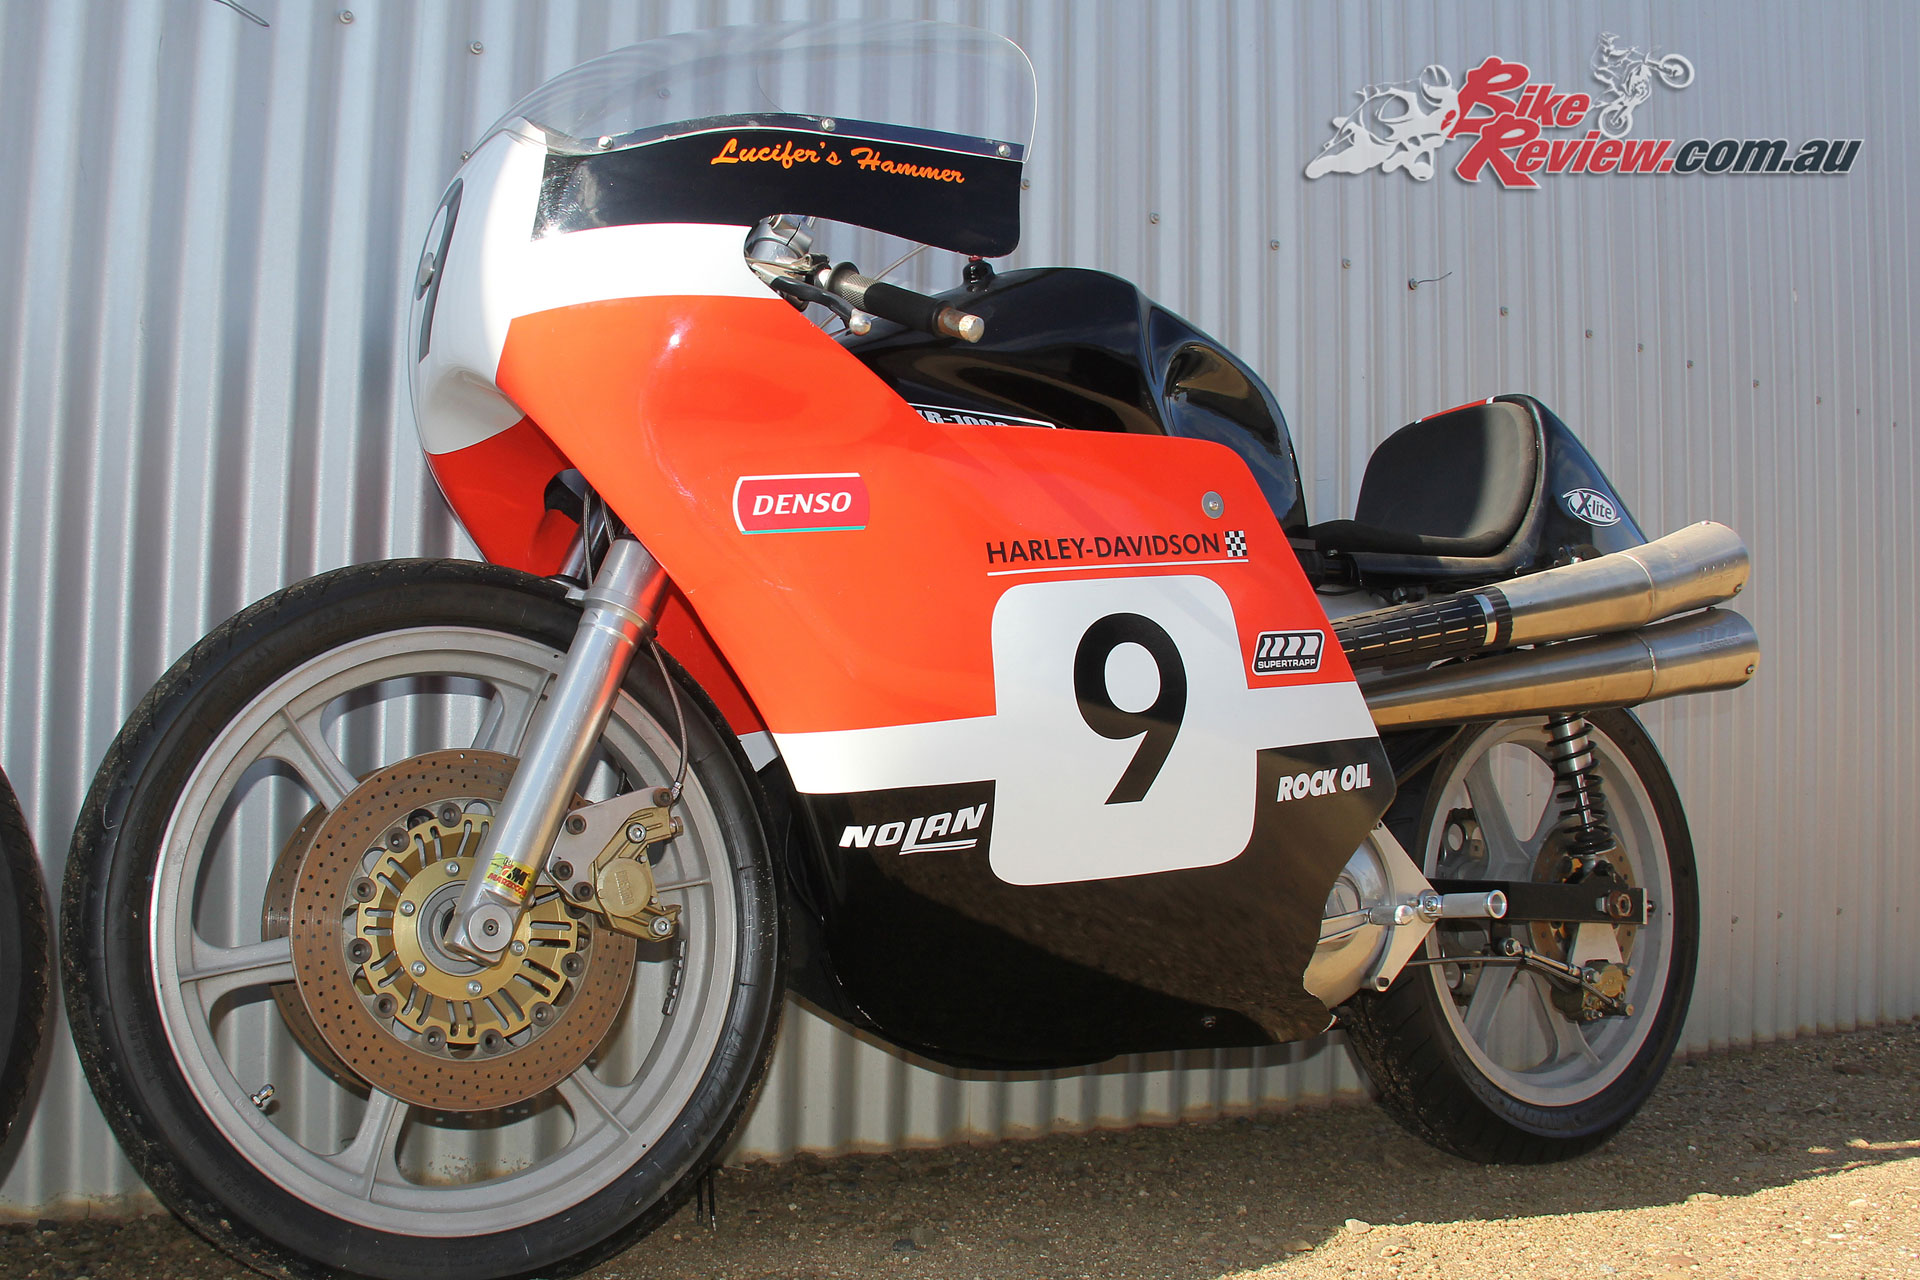 The XR 1000 would follow in 1983, this time a road legal offering but offering a race kit